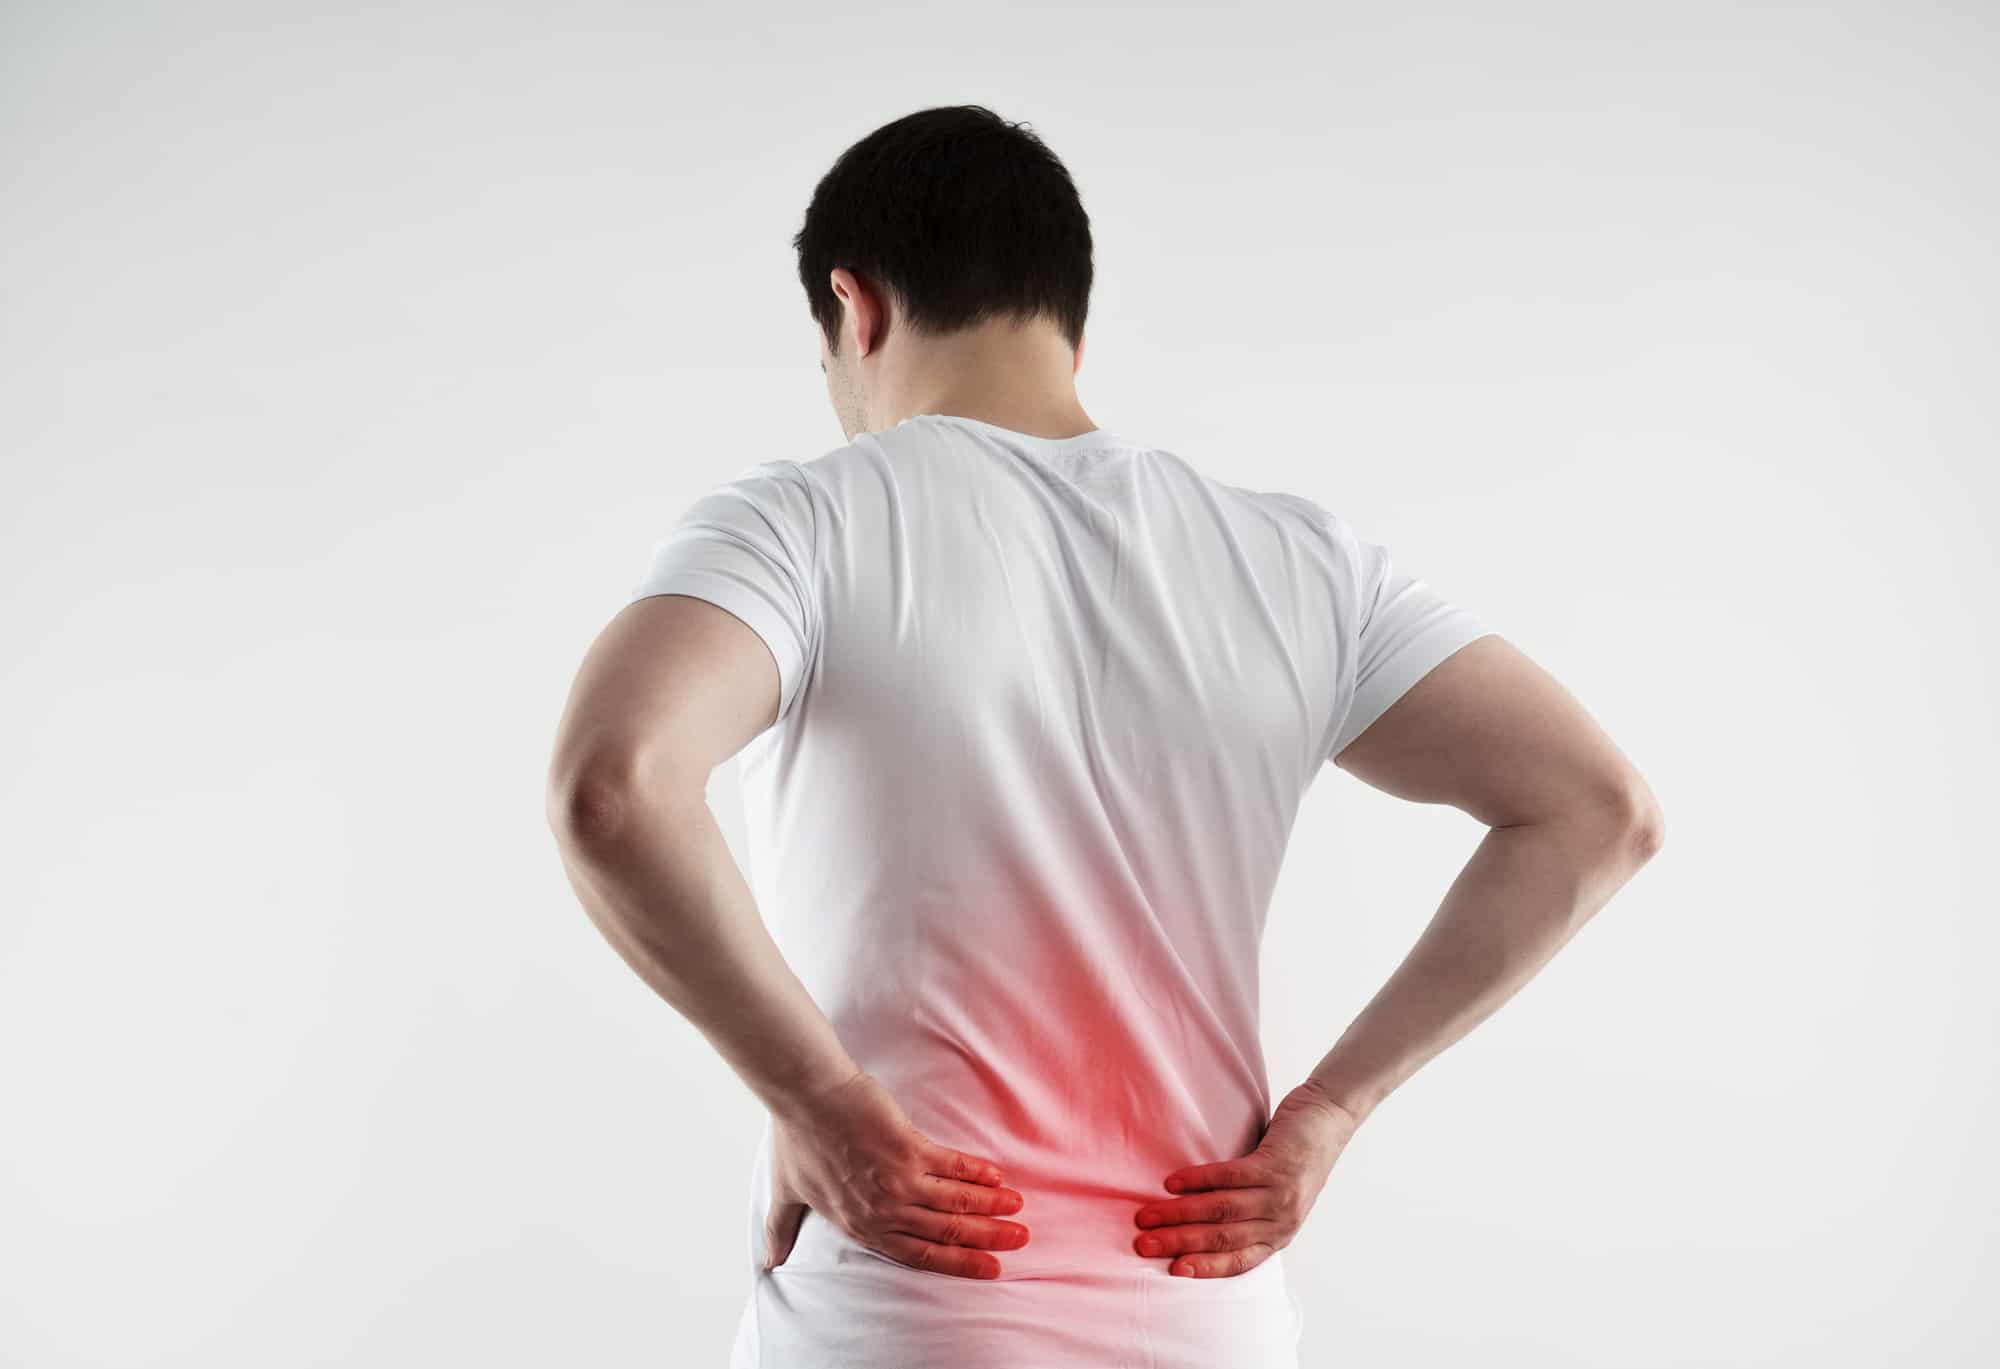 What Could Be Causing This Prolonged Pain In My Coccyx Bone?